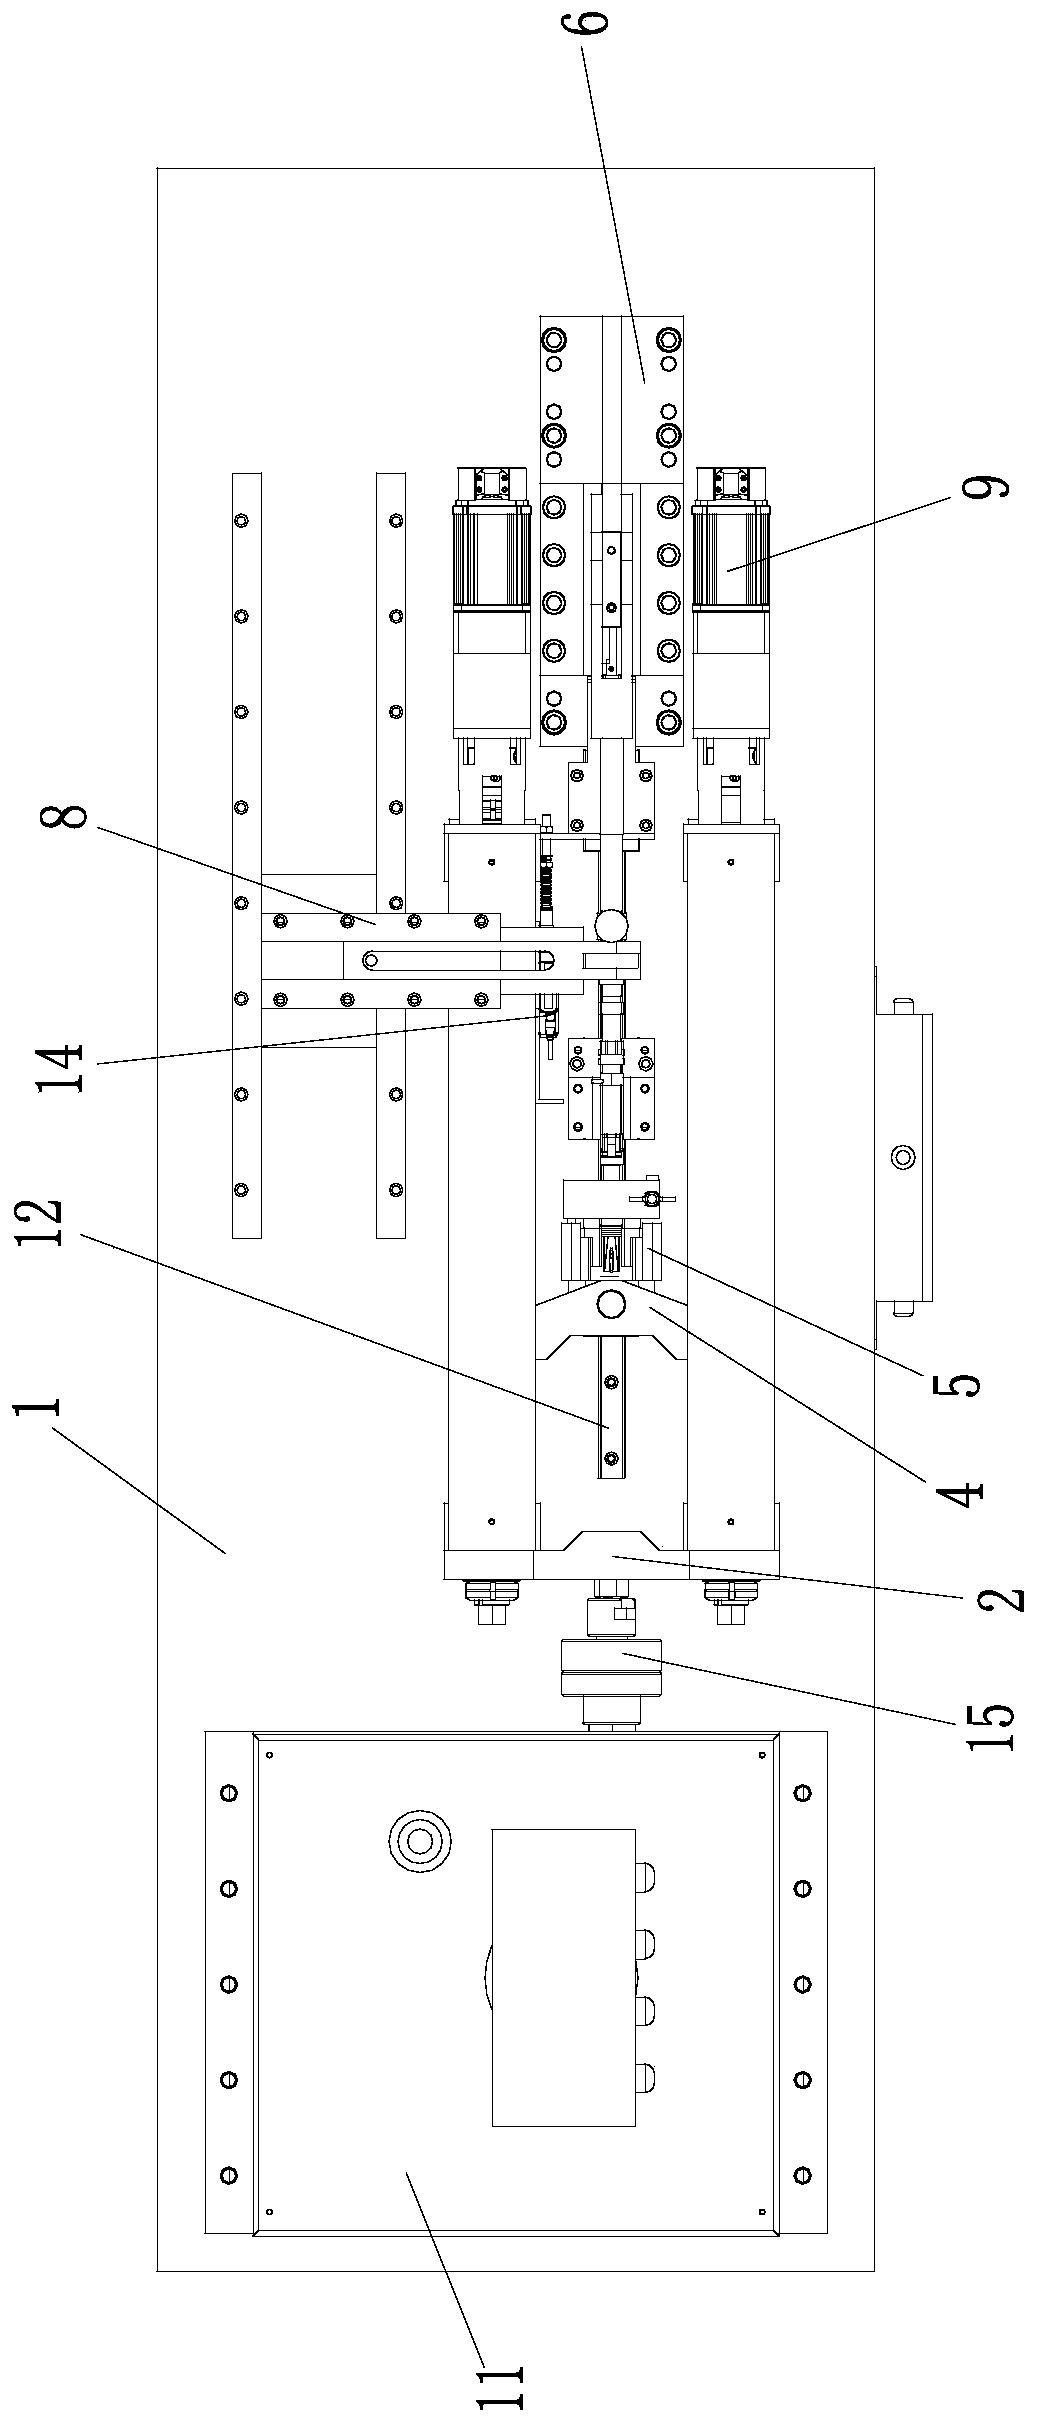 Numerical control press control system and working method thereof